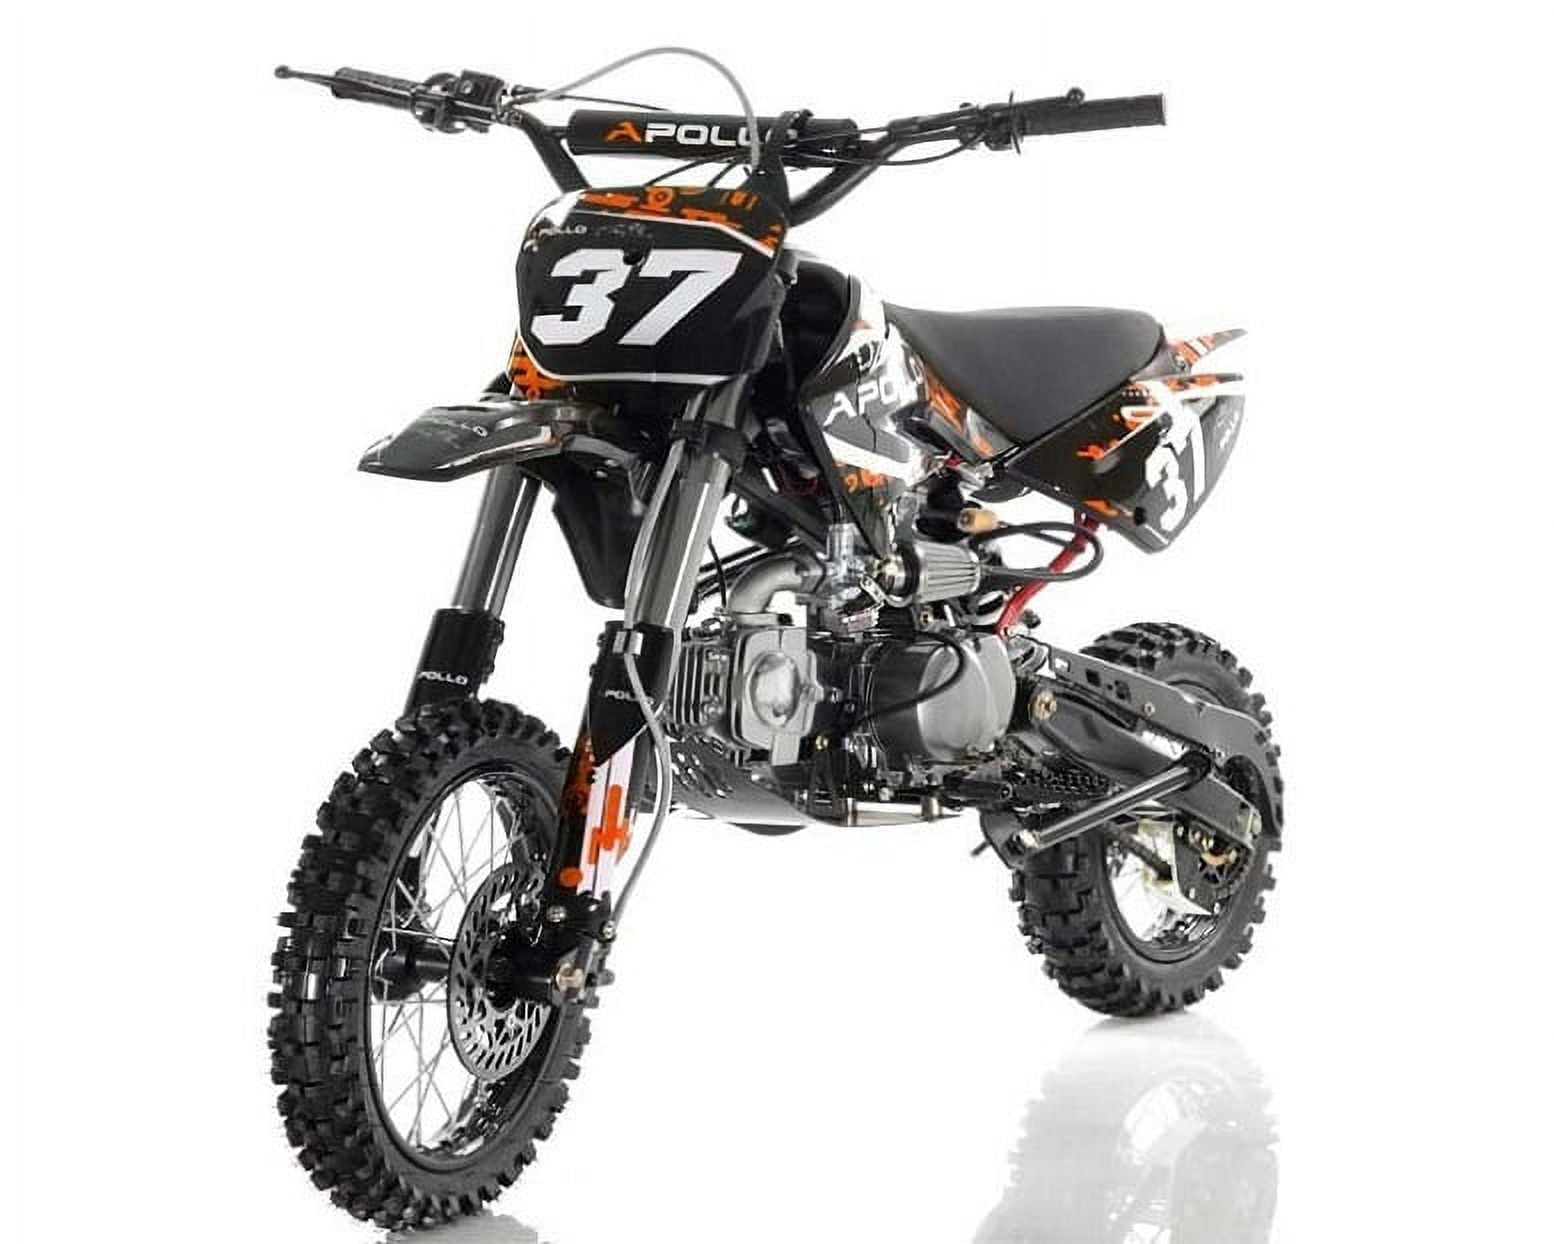 Apollo 125cc Dirt Bike Manual Transmission Apollo AGB 37 CRF-2 125cc Off Road Vitacci Motocross Kick Start dirtbike DB 37 for Youth - Choose your color